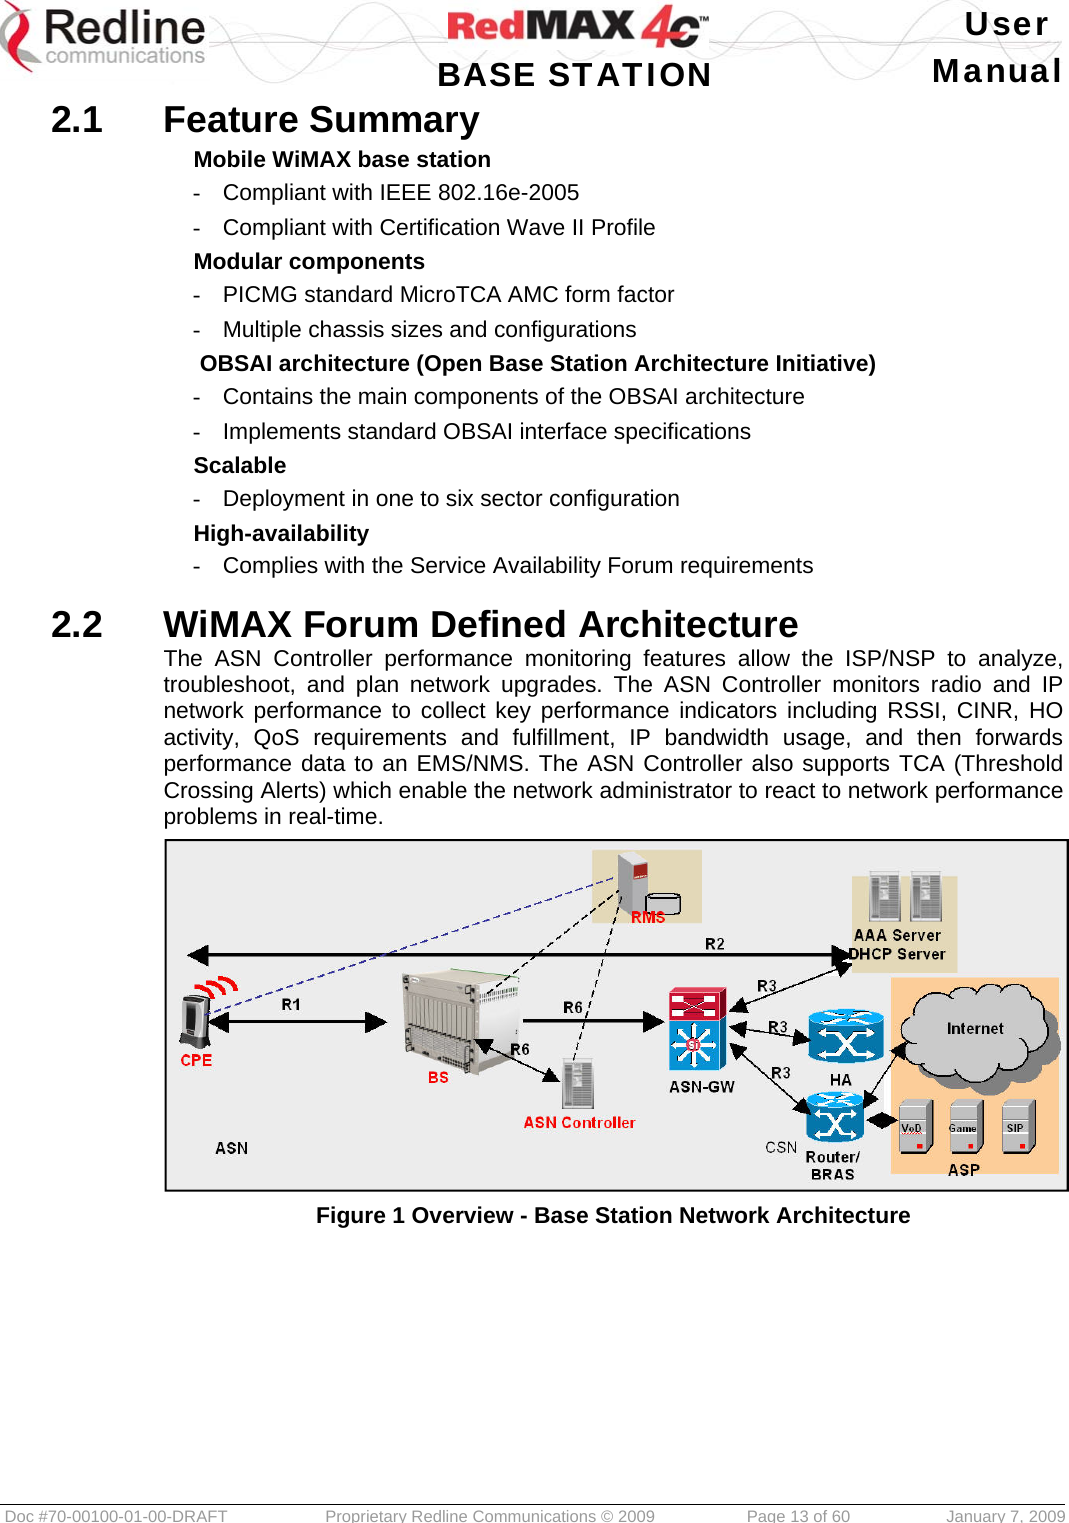   User  BASE STATION Manual  Doc #70-00100-01-00-DRAFT  Proprietary Redline Communications © 2009   Page 13 of 60  January 7, 2009 2.1  Feature Summary Mobile WiMAX base station -  Compliant with IEEE 802.16e-2005 -  Compliant with Certification Wave II Profile  Modular components -  PICMG standard MicroTCA AMC form factor -  Multiple chassis sizes and configurations  OBSAI architecture (Open Base Station Architecture Initiative) -  Contains the main components of the OBSAI architecture -  Implements standard OBSAI interface specifications Scalable -  Deployment in one to six sector configuration High-availability -  Complies with the Service Availability Forum requirements  2.2  WiMAX Forum Defined Architecture The ASN Controller performance monitoring features allow the ISP/NSP to analyze, troubleshoot, and plan network upgrades. The ASN Controller monitors radio and IP network performance to collect key performance indicators including RSSI, CINR, HO activity, QoS requirements and fulfillment, IP bandwidth usage, and then forwards performance data to an EMS/NMS. The ASN Controller also supports TCA (Threshold Crossing Alerts) which enable the network administrator to react to network performance problems in real-time.  Figure 1 Overview - Base Station Network Architecture    